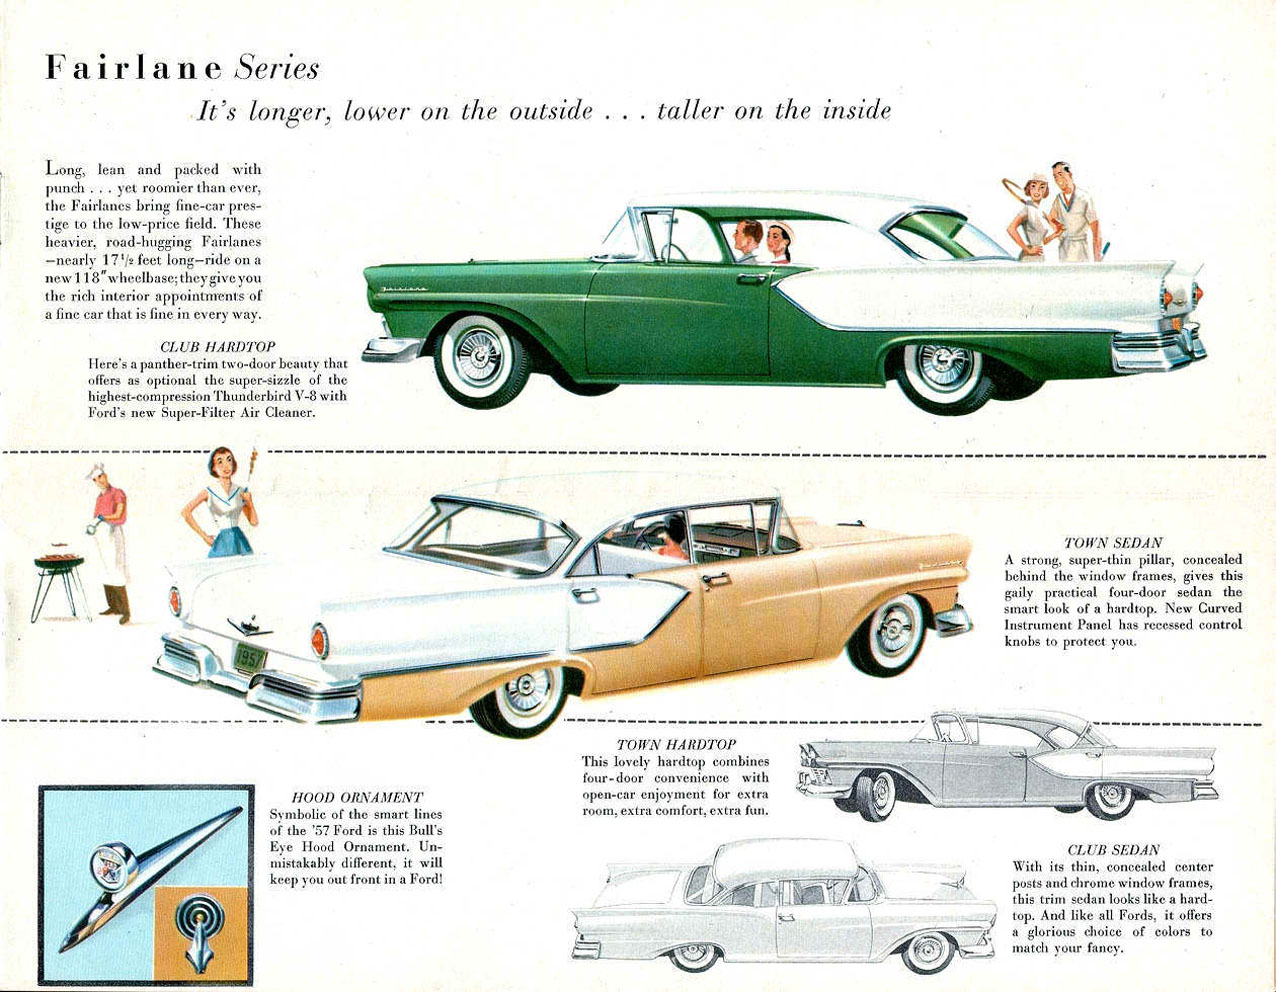 1957 Ford Full-Line Brochure Page 6